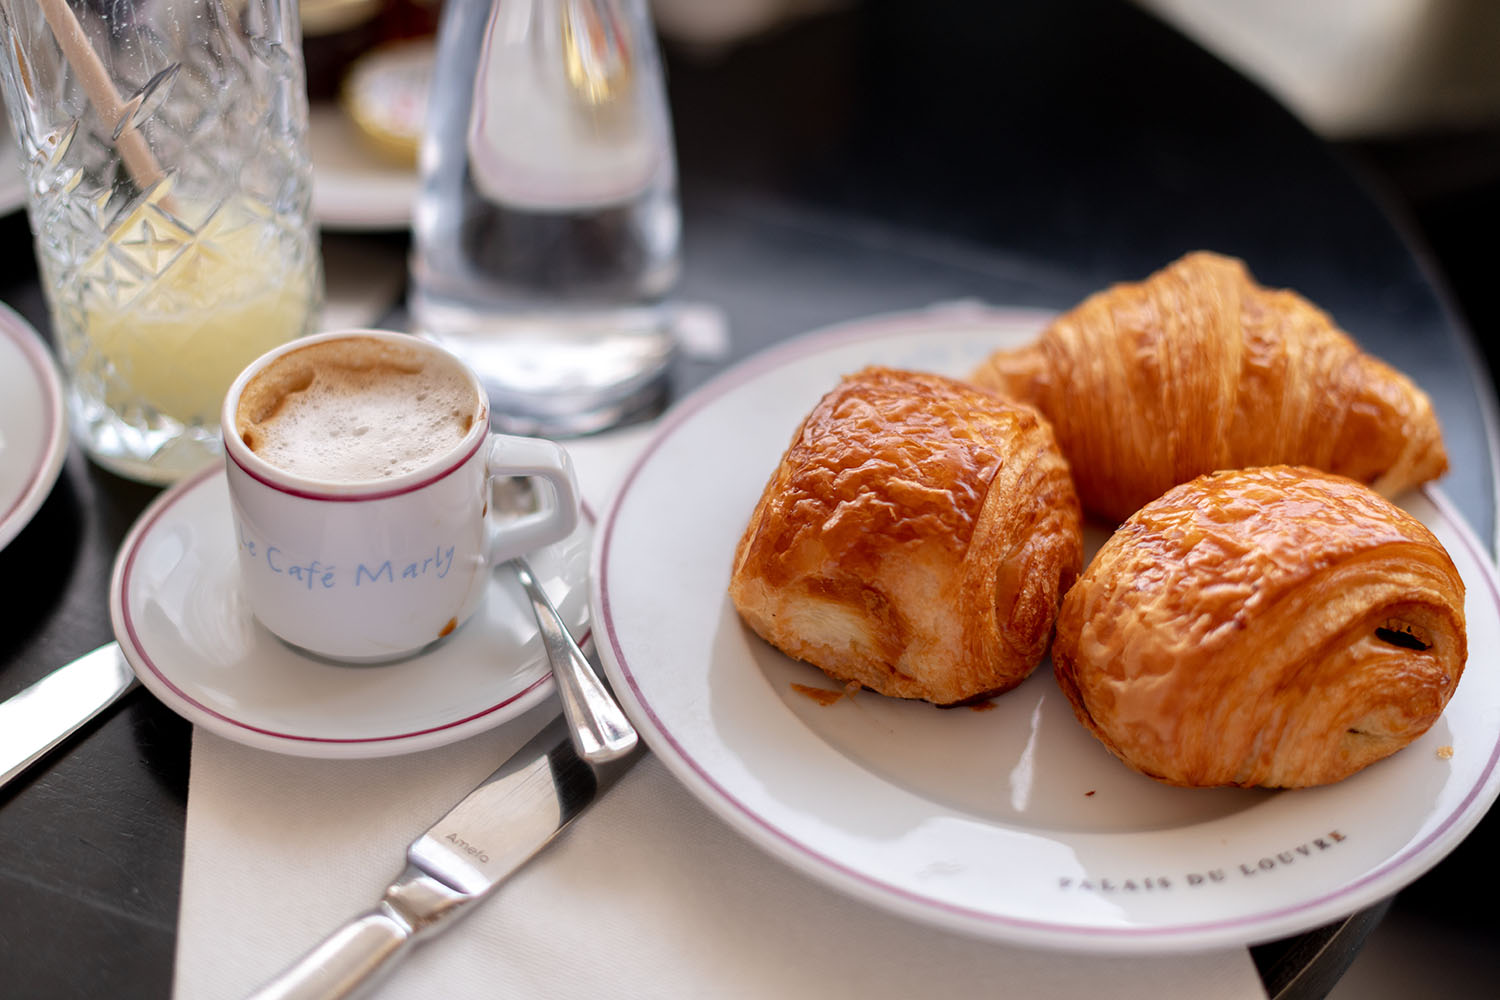 Coco & Voltaire - Viennoiseries on a Cafe Marly plate next to a Cafe Marly espresso cup filled with coffee